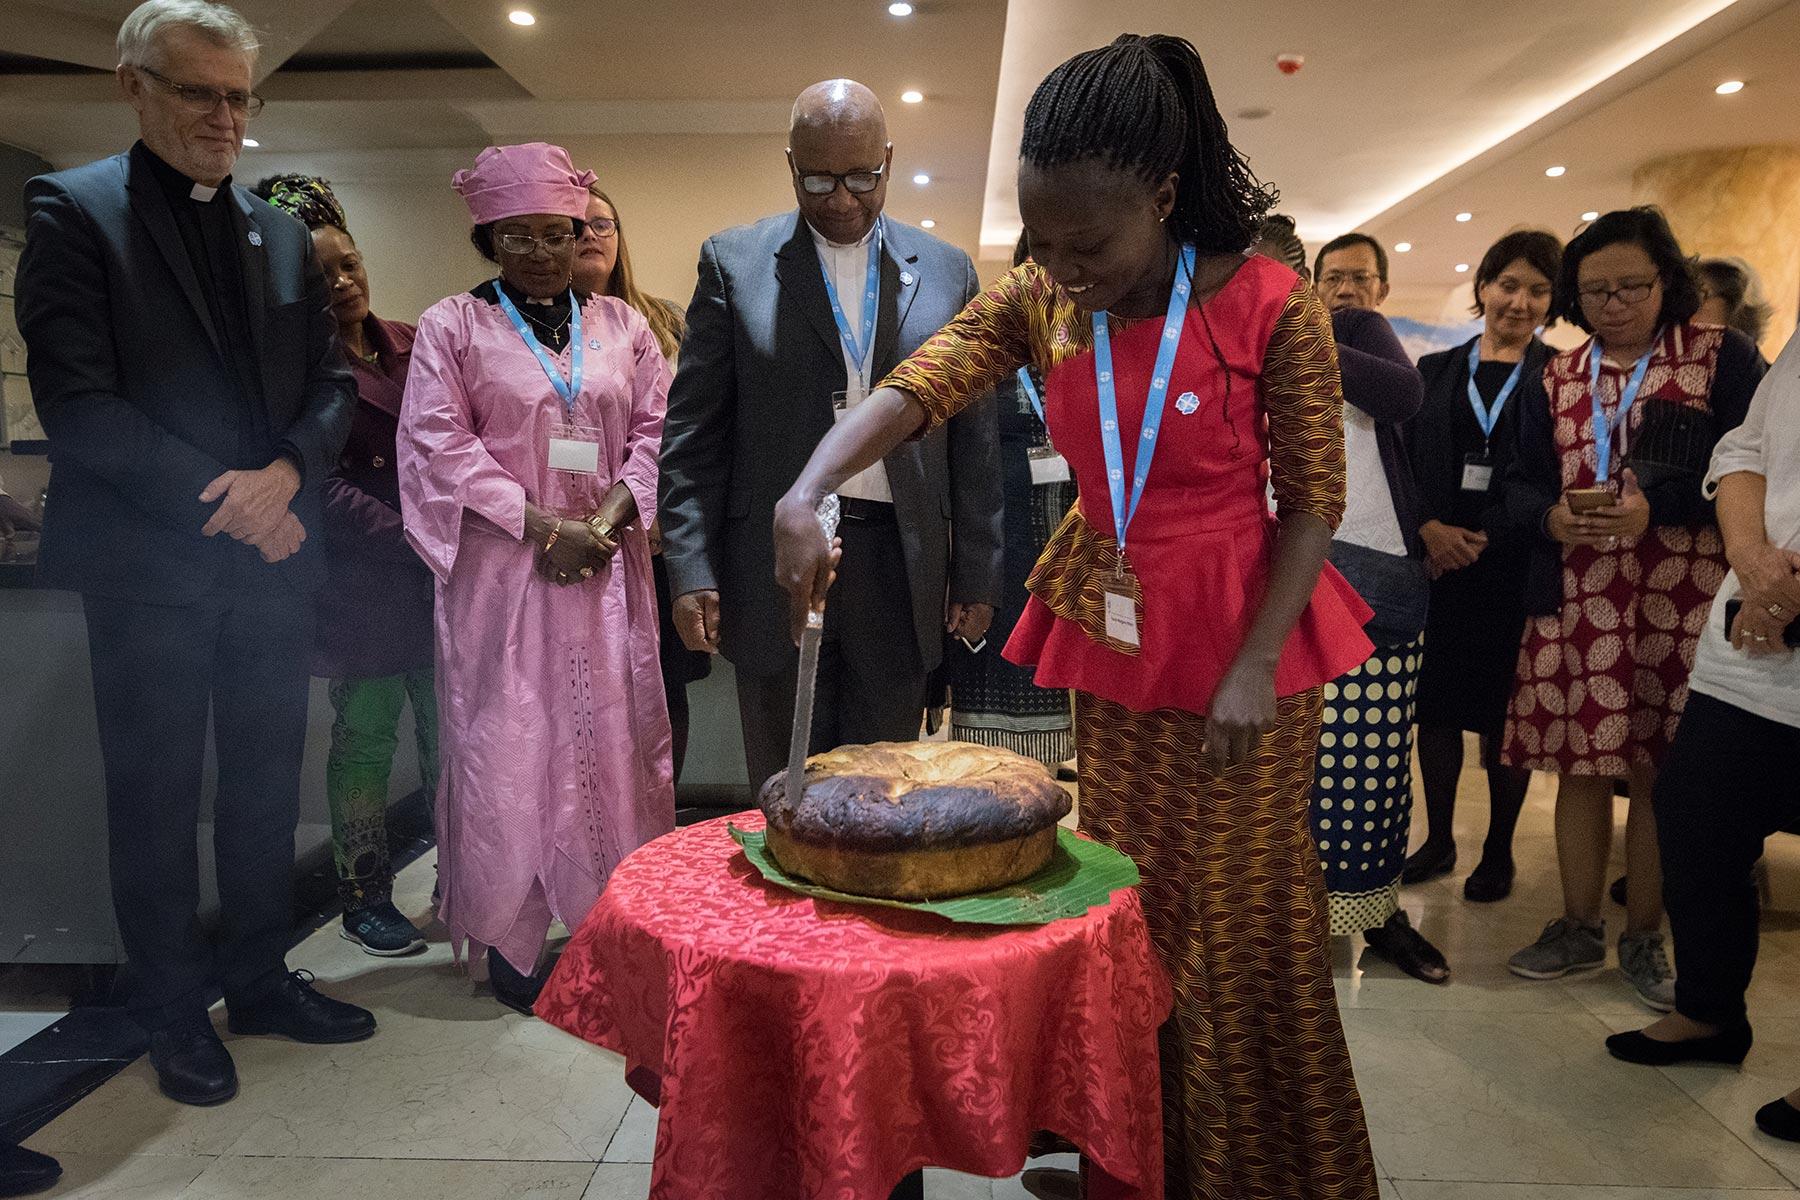 Gathered in Addis Ababa, Ethiopia, in October 2019, Lutherans from across the globe took part in a consultation on the theme of âWe believe in the Holy Spirit: Global Perspectives on Lutheran Identitiesâ. During the meeting, participants shared a large loaf of traditional Ethiopian bread, baked in banana leaves. Photo: LWF/Albin Hillert